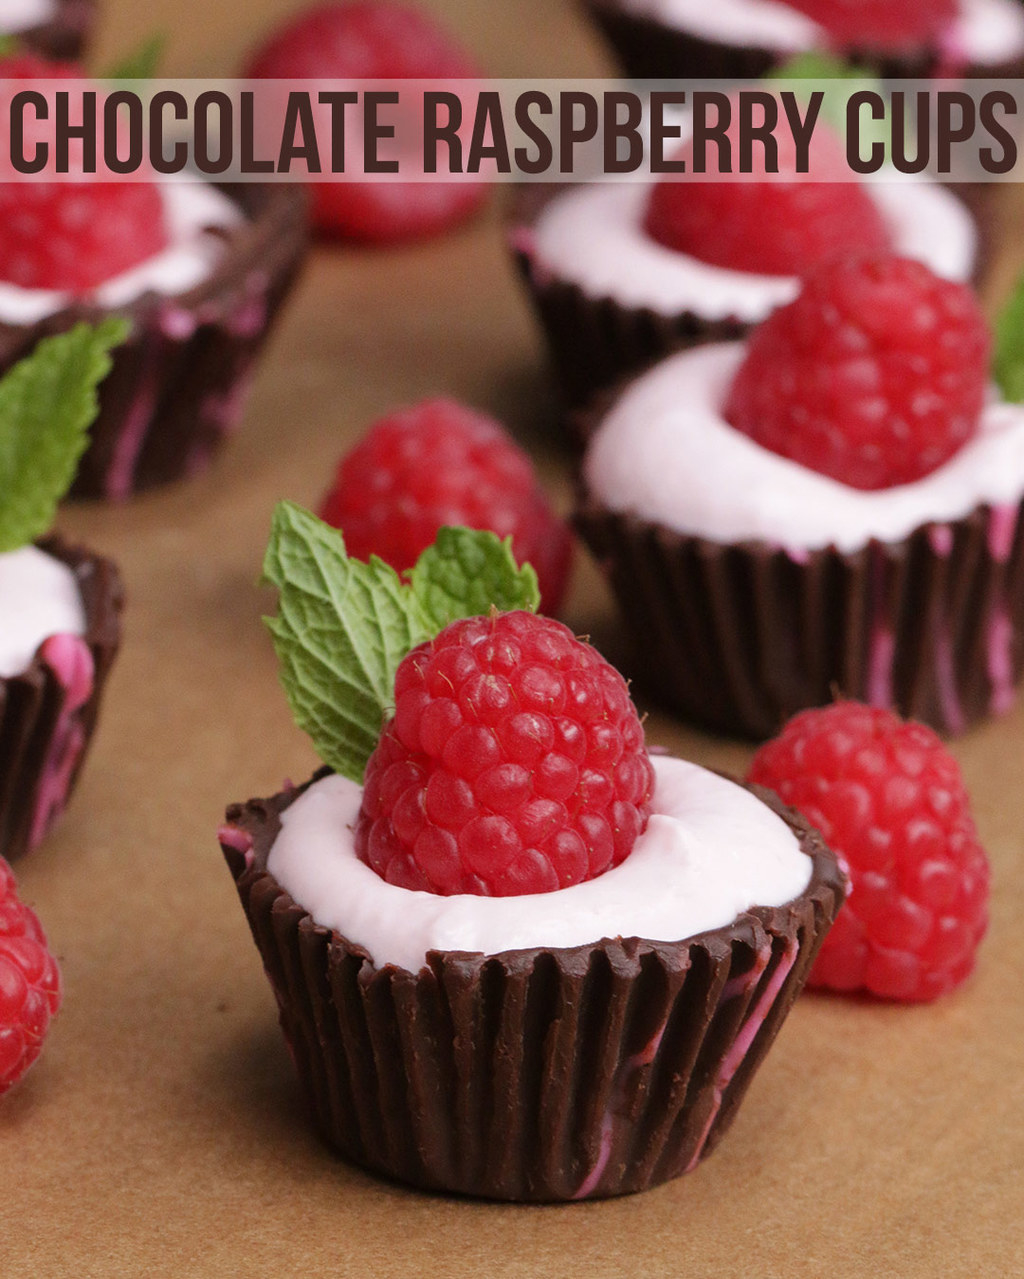 Mini chocolate cups filled with vanilla icing and a raspberry